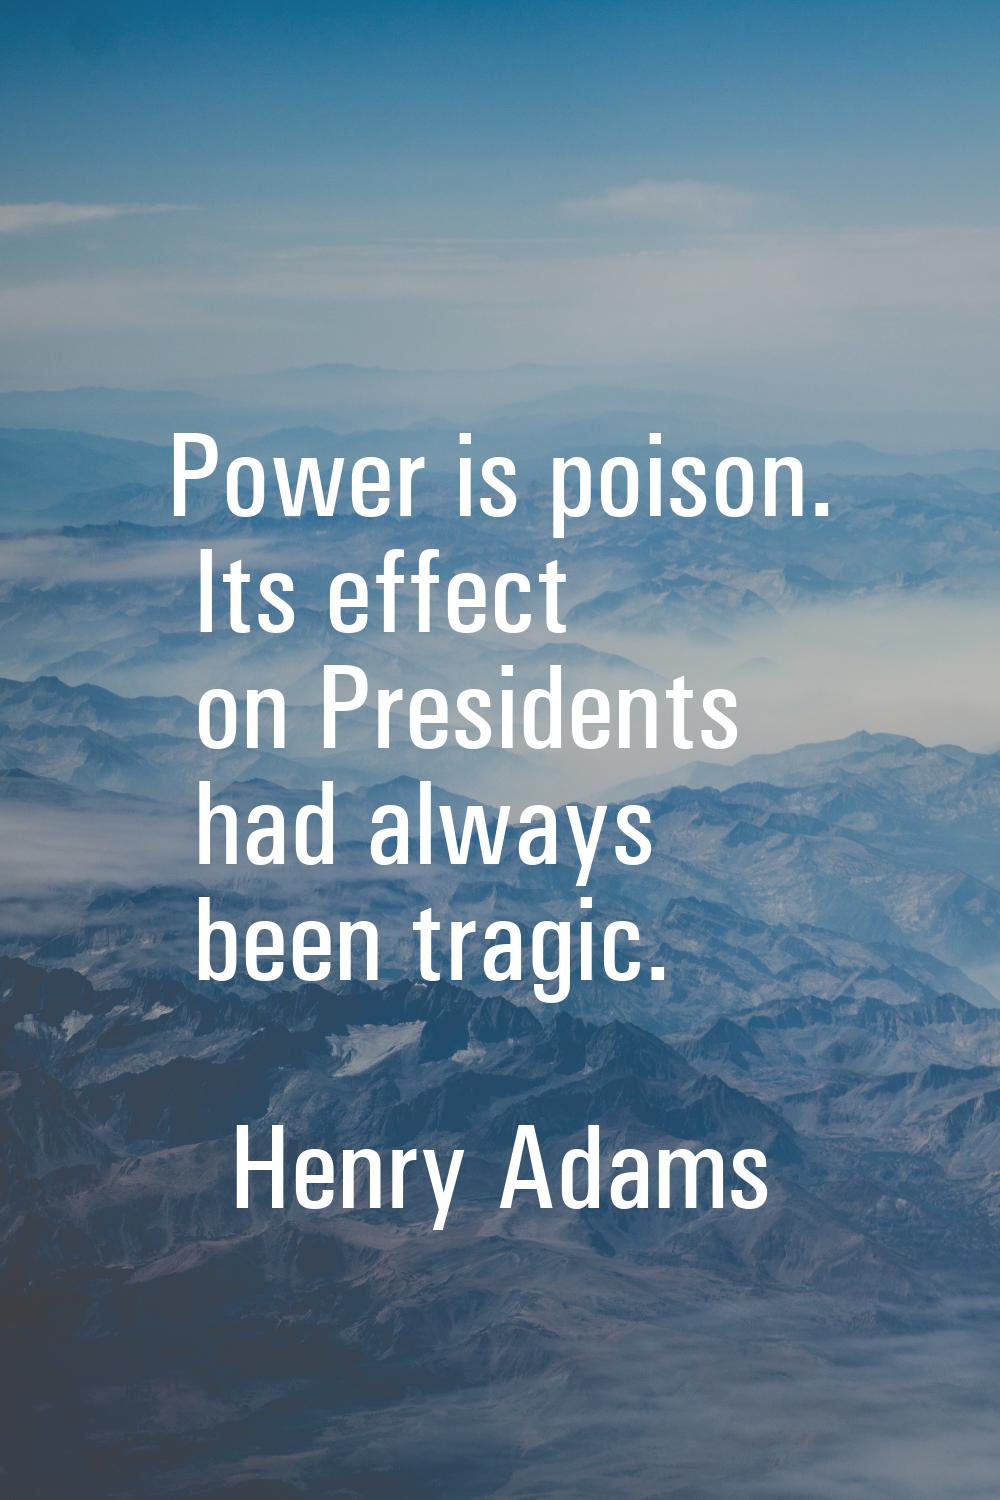 Power is poison. Its effect on Presidents had always been tragic.